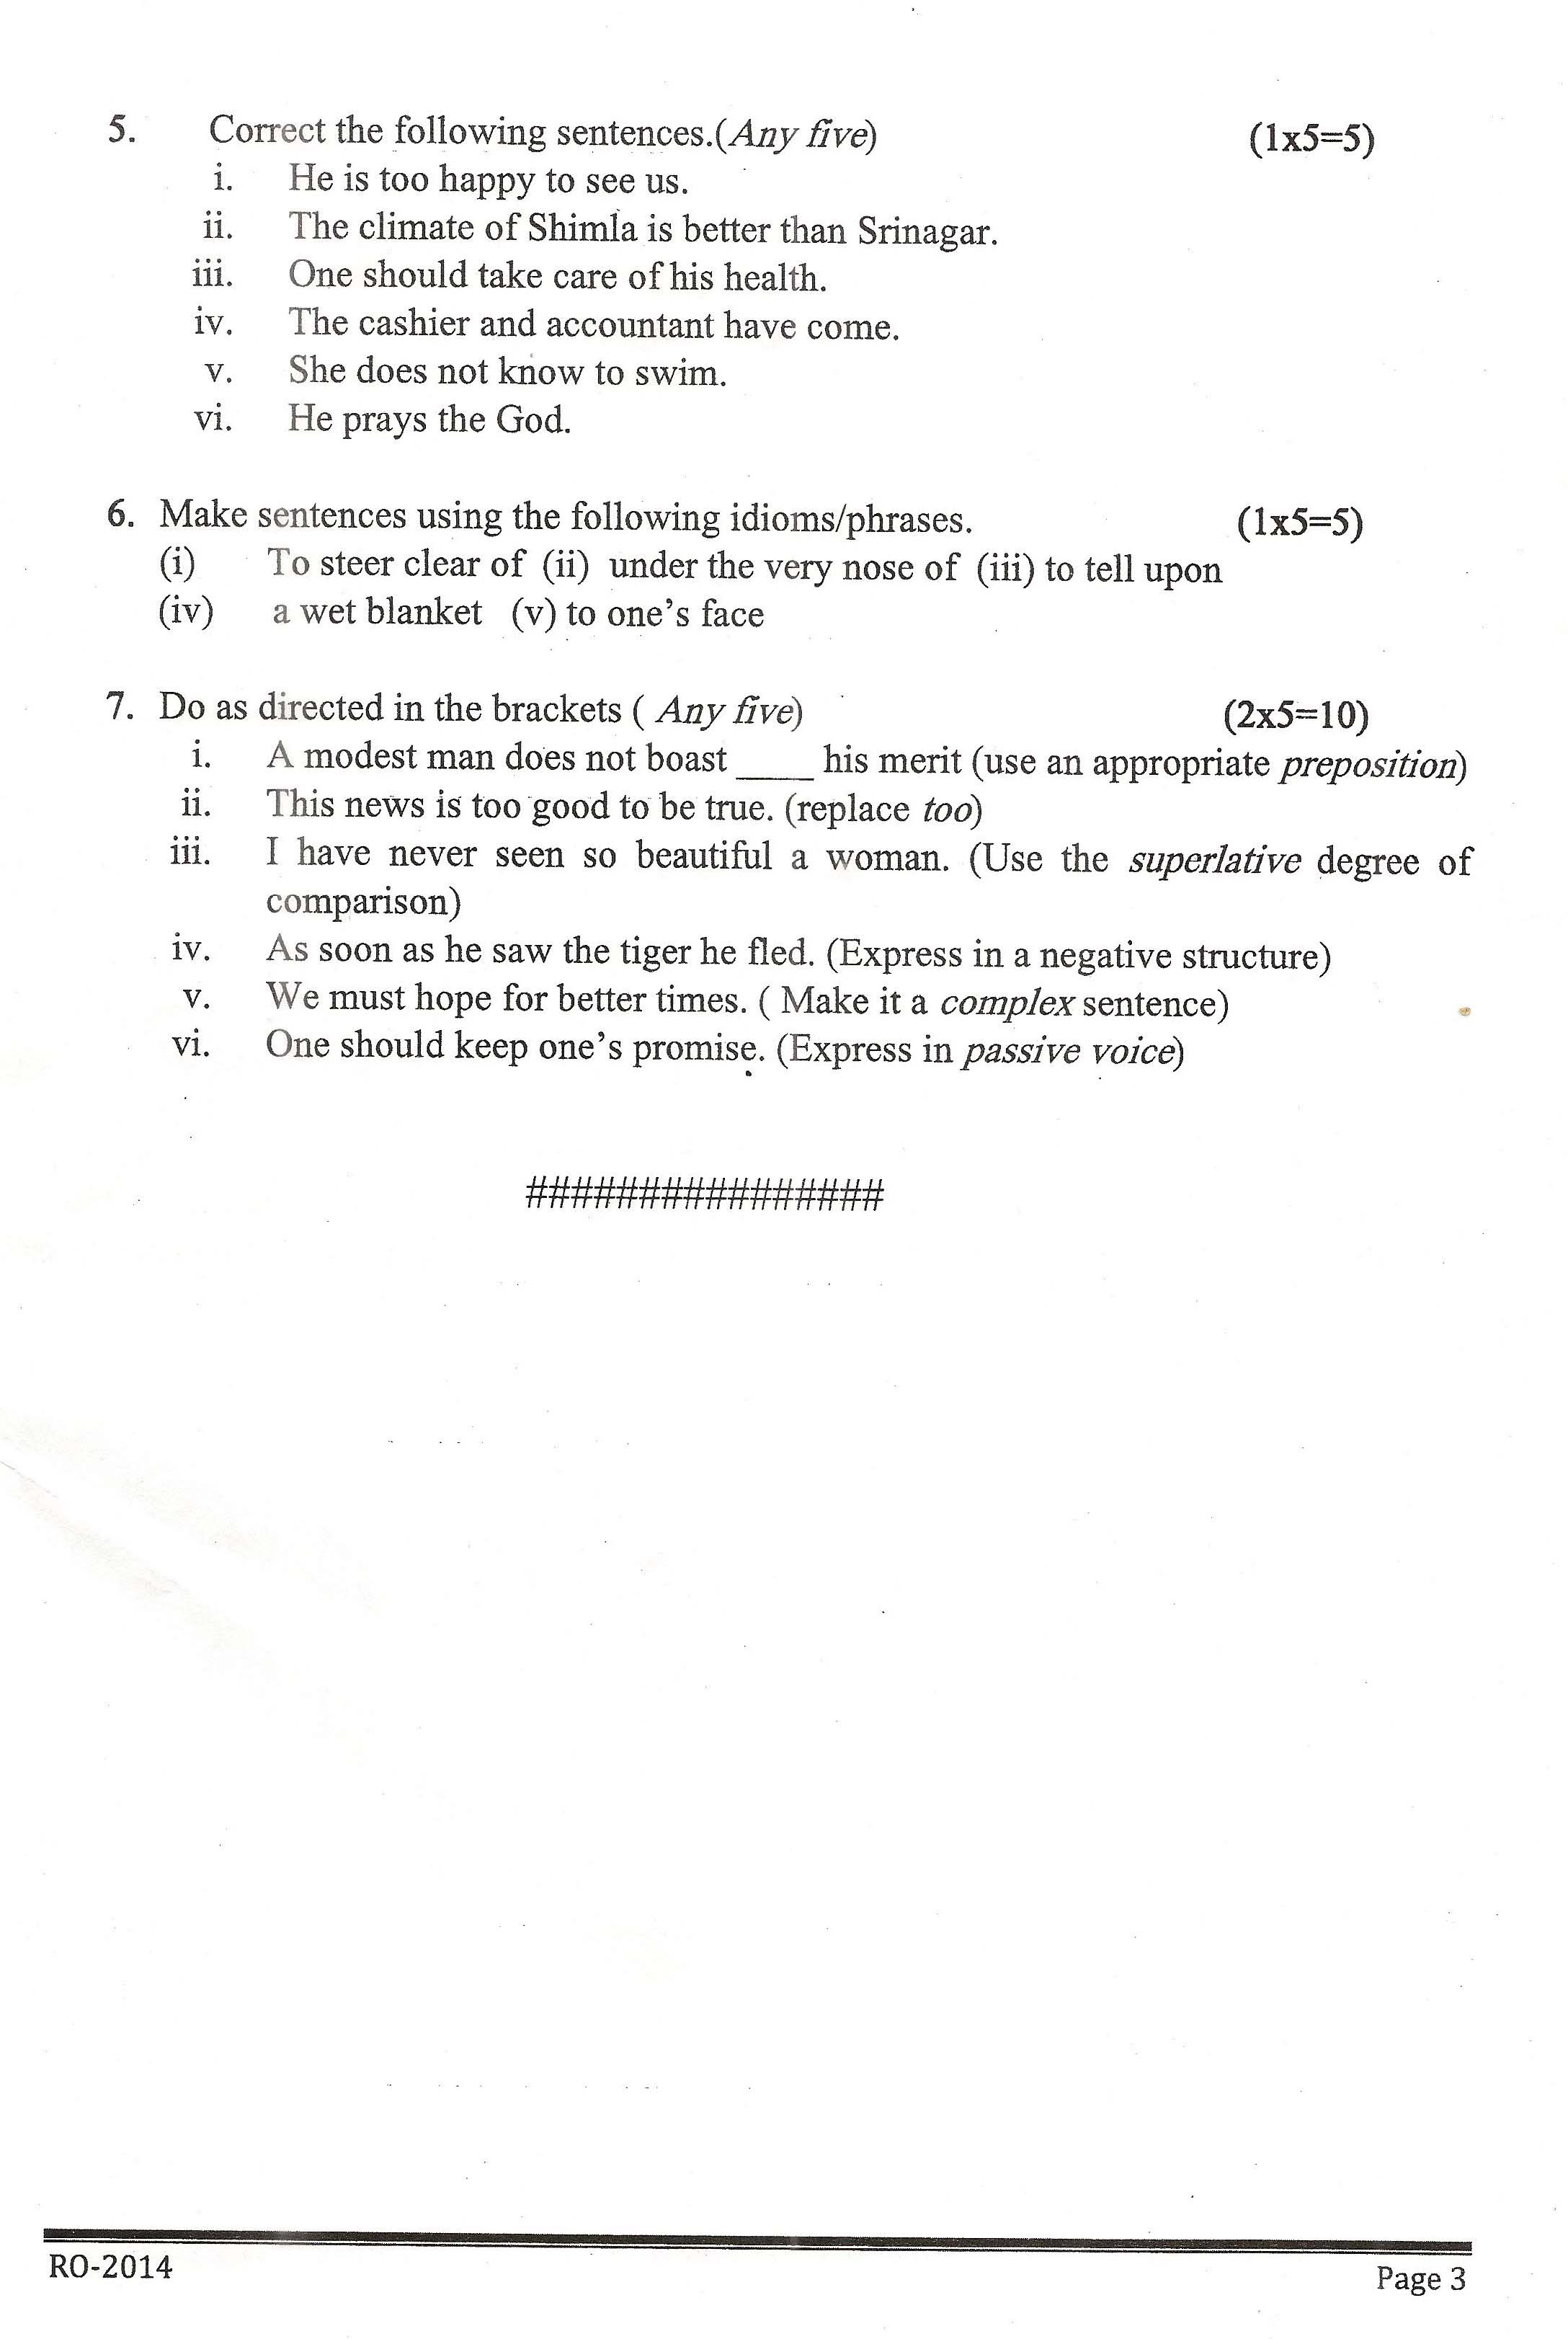 APPSC Research Officer General English Exam Question Paper 2014 3